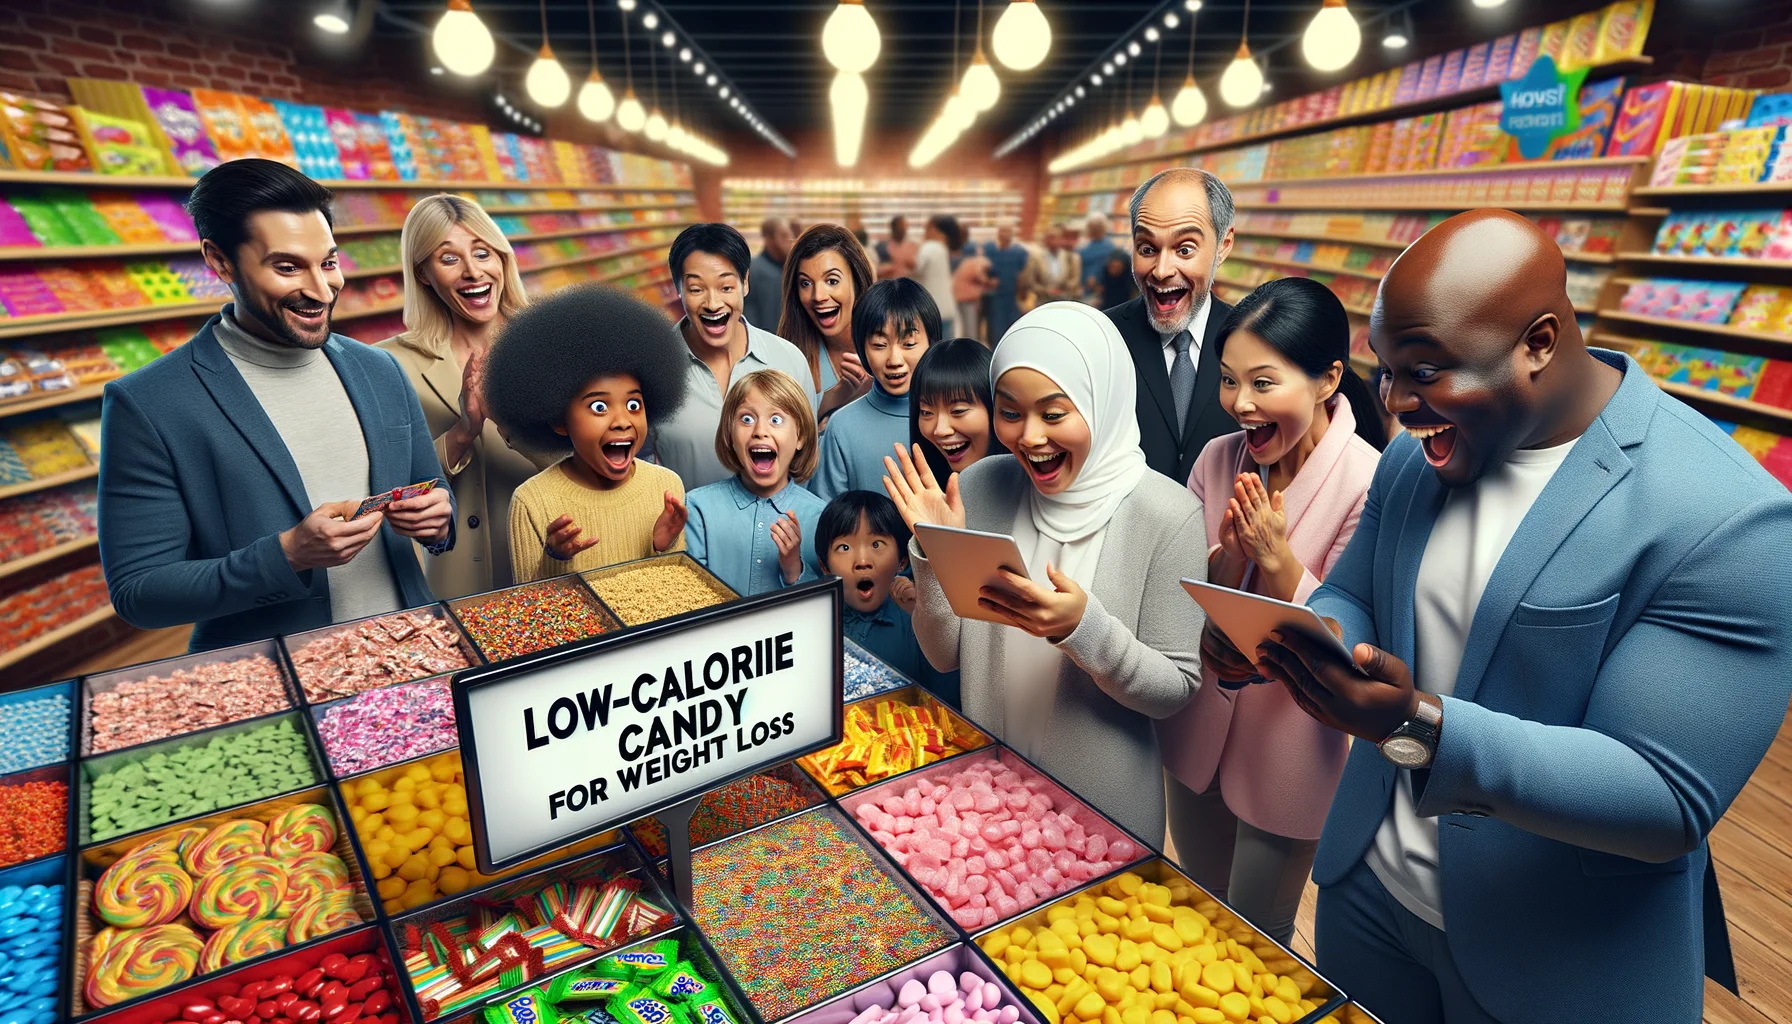 Imagine a scene taking place in a brightly lit, spacious health food store. An excited crowd of people with varying descents and genders are gathered around a newly displayed section labeling 'Low-Calorie Candy for Weight Loss'. These sweet treats come in an array of radiant colors and fun shapes, bringing a touch of whimsy to the health-conscious offerings. An Asian woman is reading the nutritional information with a surprised smile, while a Black man is selecting candies and filling his basket. A Middle-Eastern child is pointing at the candy with wide-eyed fascination, creating a light-hearted, and comical atmosphere.